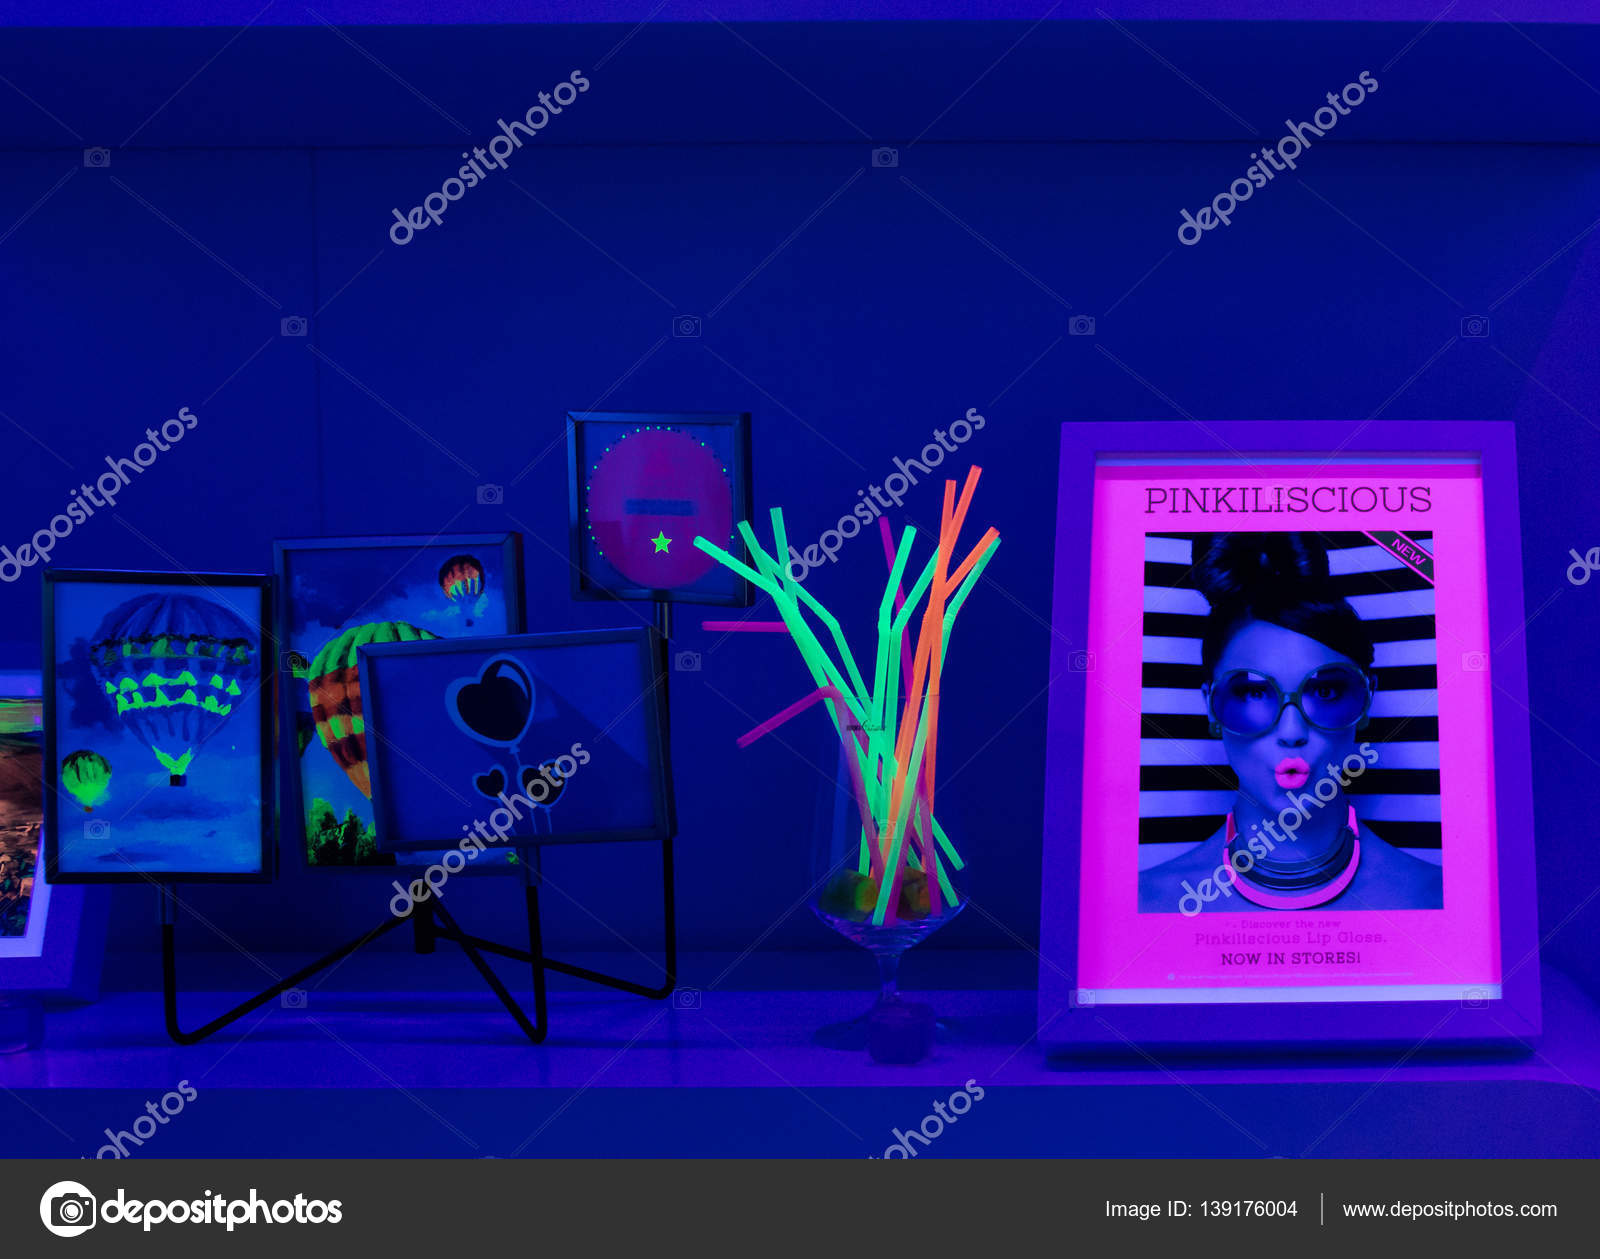 Examples of print fluorescent colors, neon room exhibition hall